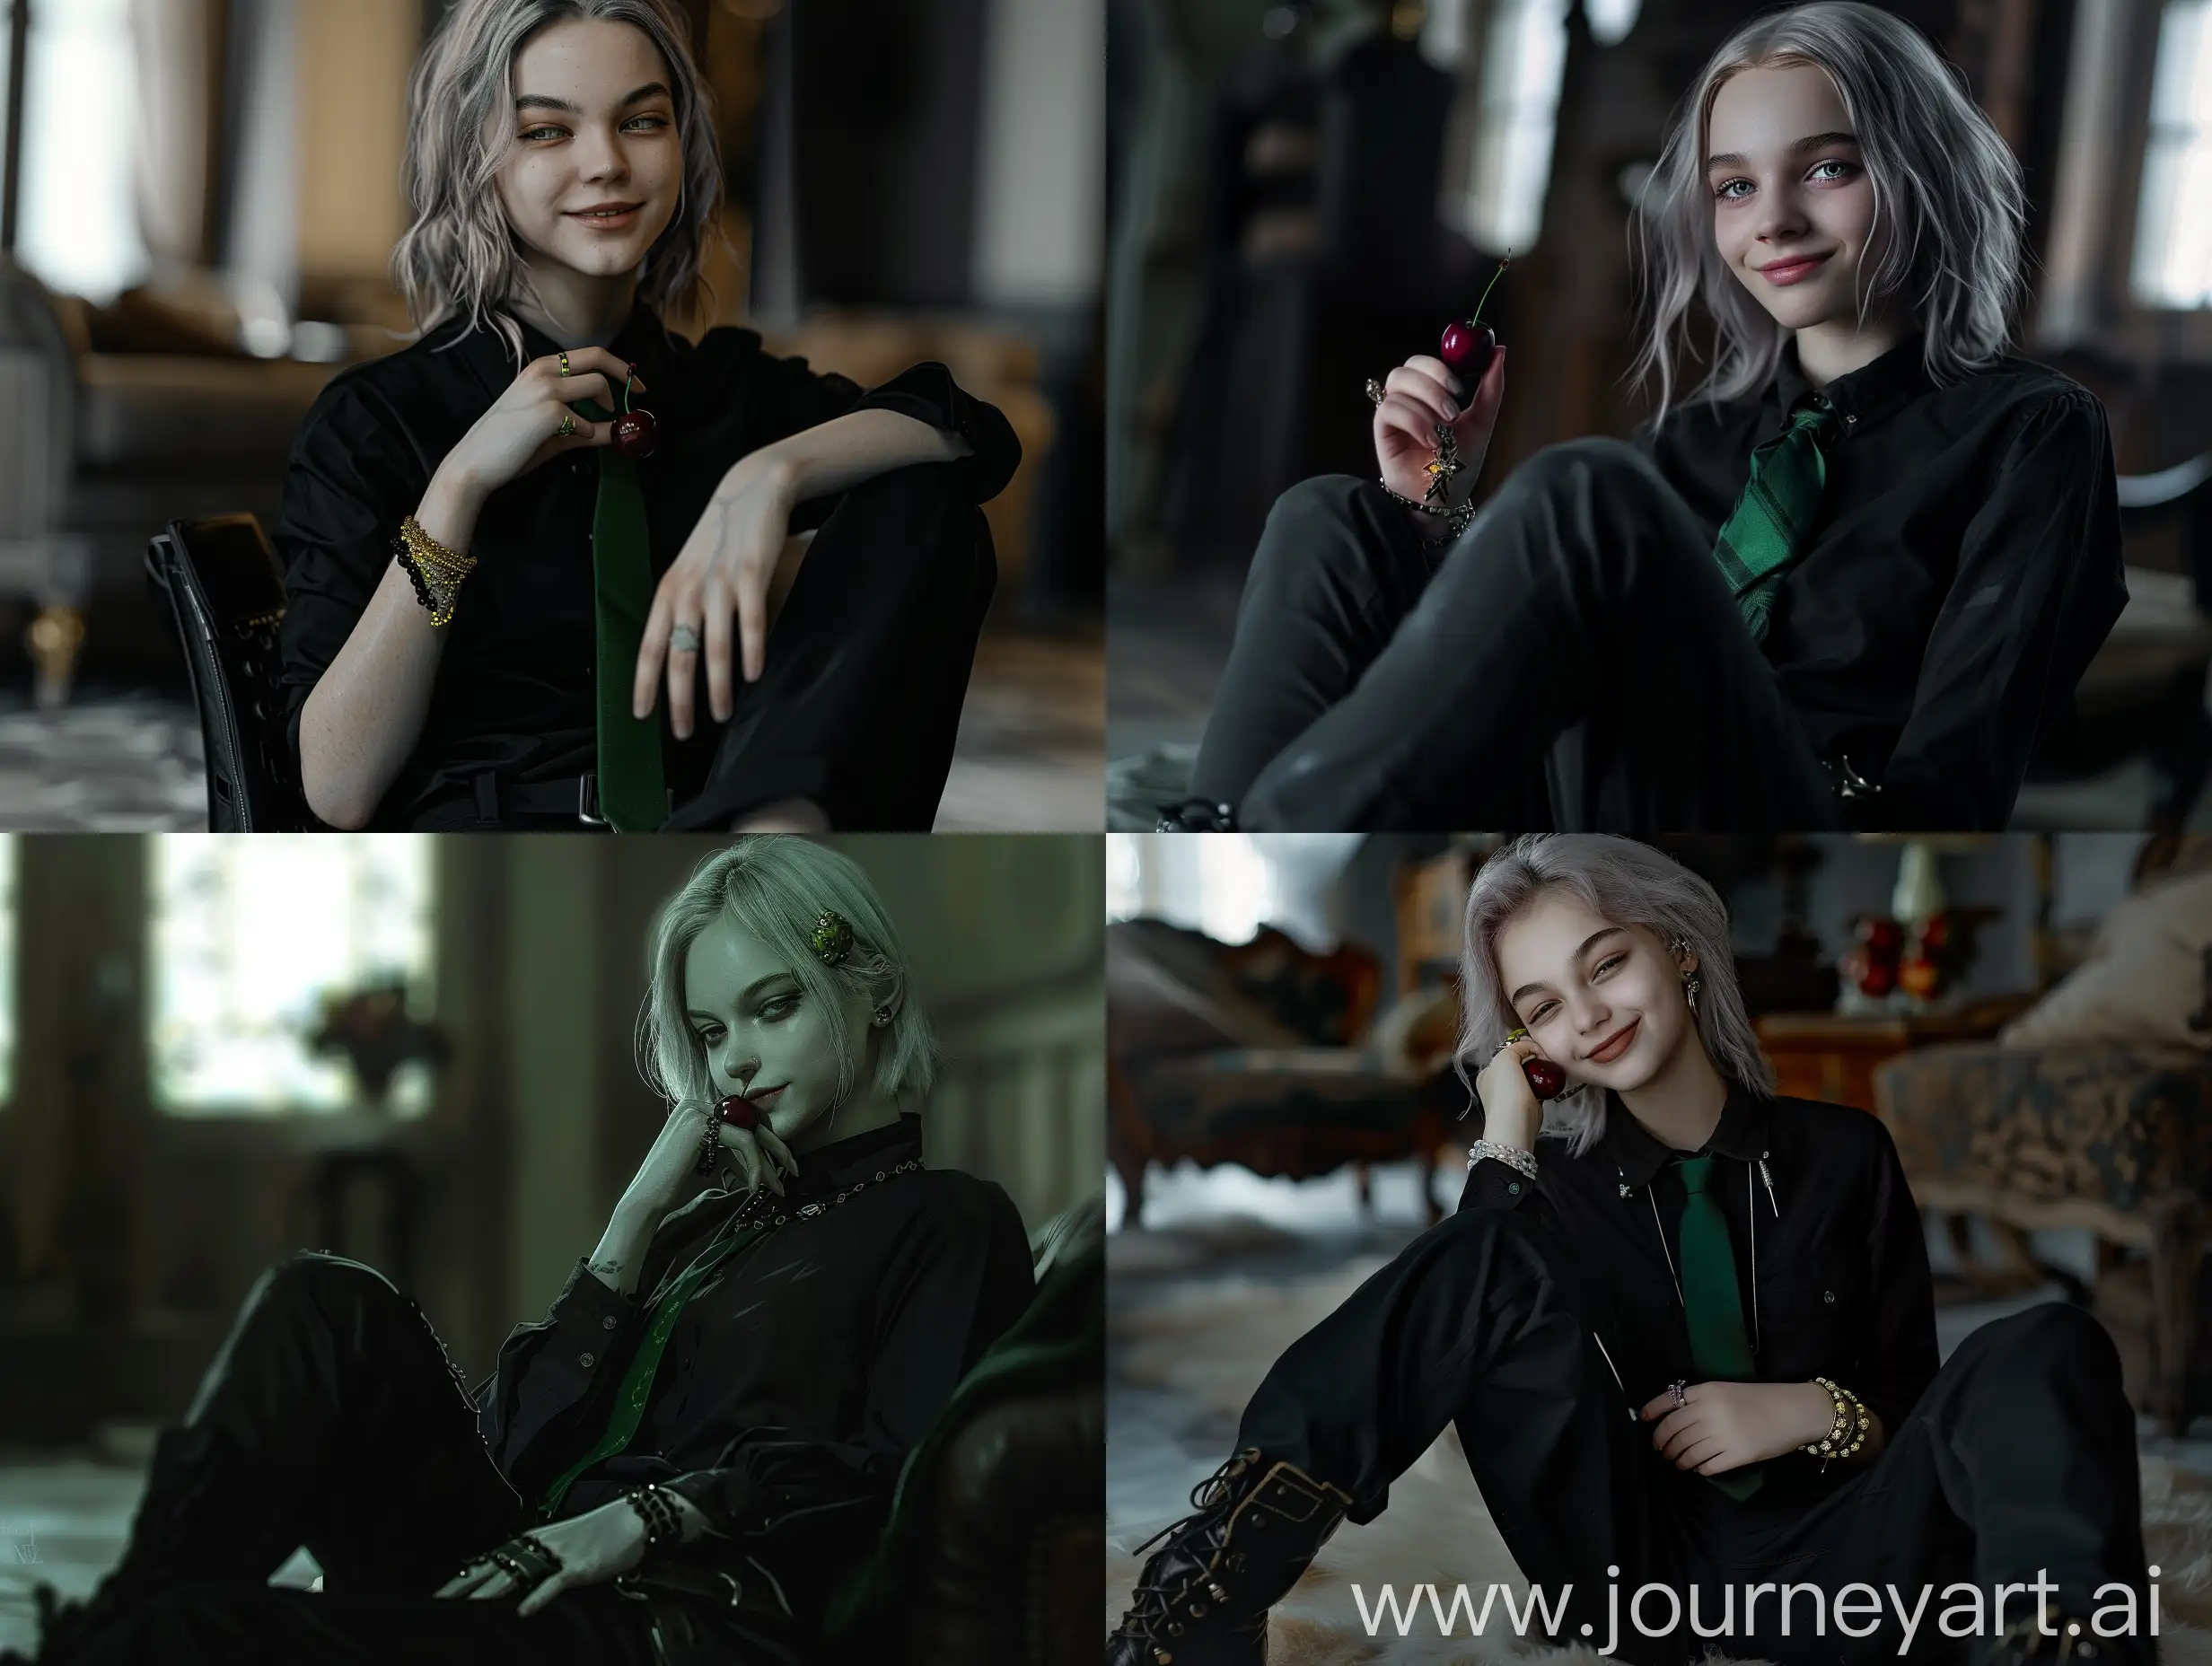 Realistic, light smile, dark outfit, unusual, 1girl, European, solo, pale skin, teenage, boots, bracelet, jewelry, beautiful, Cunning, slight smirk, closed lips, narrowed eyes, dark eyes, black shirt, green tie, dark violet eyes, black shirt, green tie, light ash-grey-blond hair, medium length hair, apathy, elite, luxury, nobility, estate, hair ornament, estate inside, interior in black and white colors, minimalist design, holding a cherry, blurry background, black trousers, sitting, film moment 